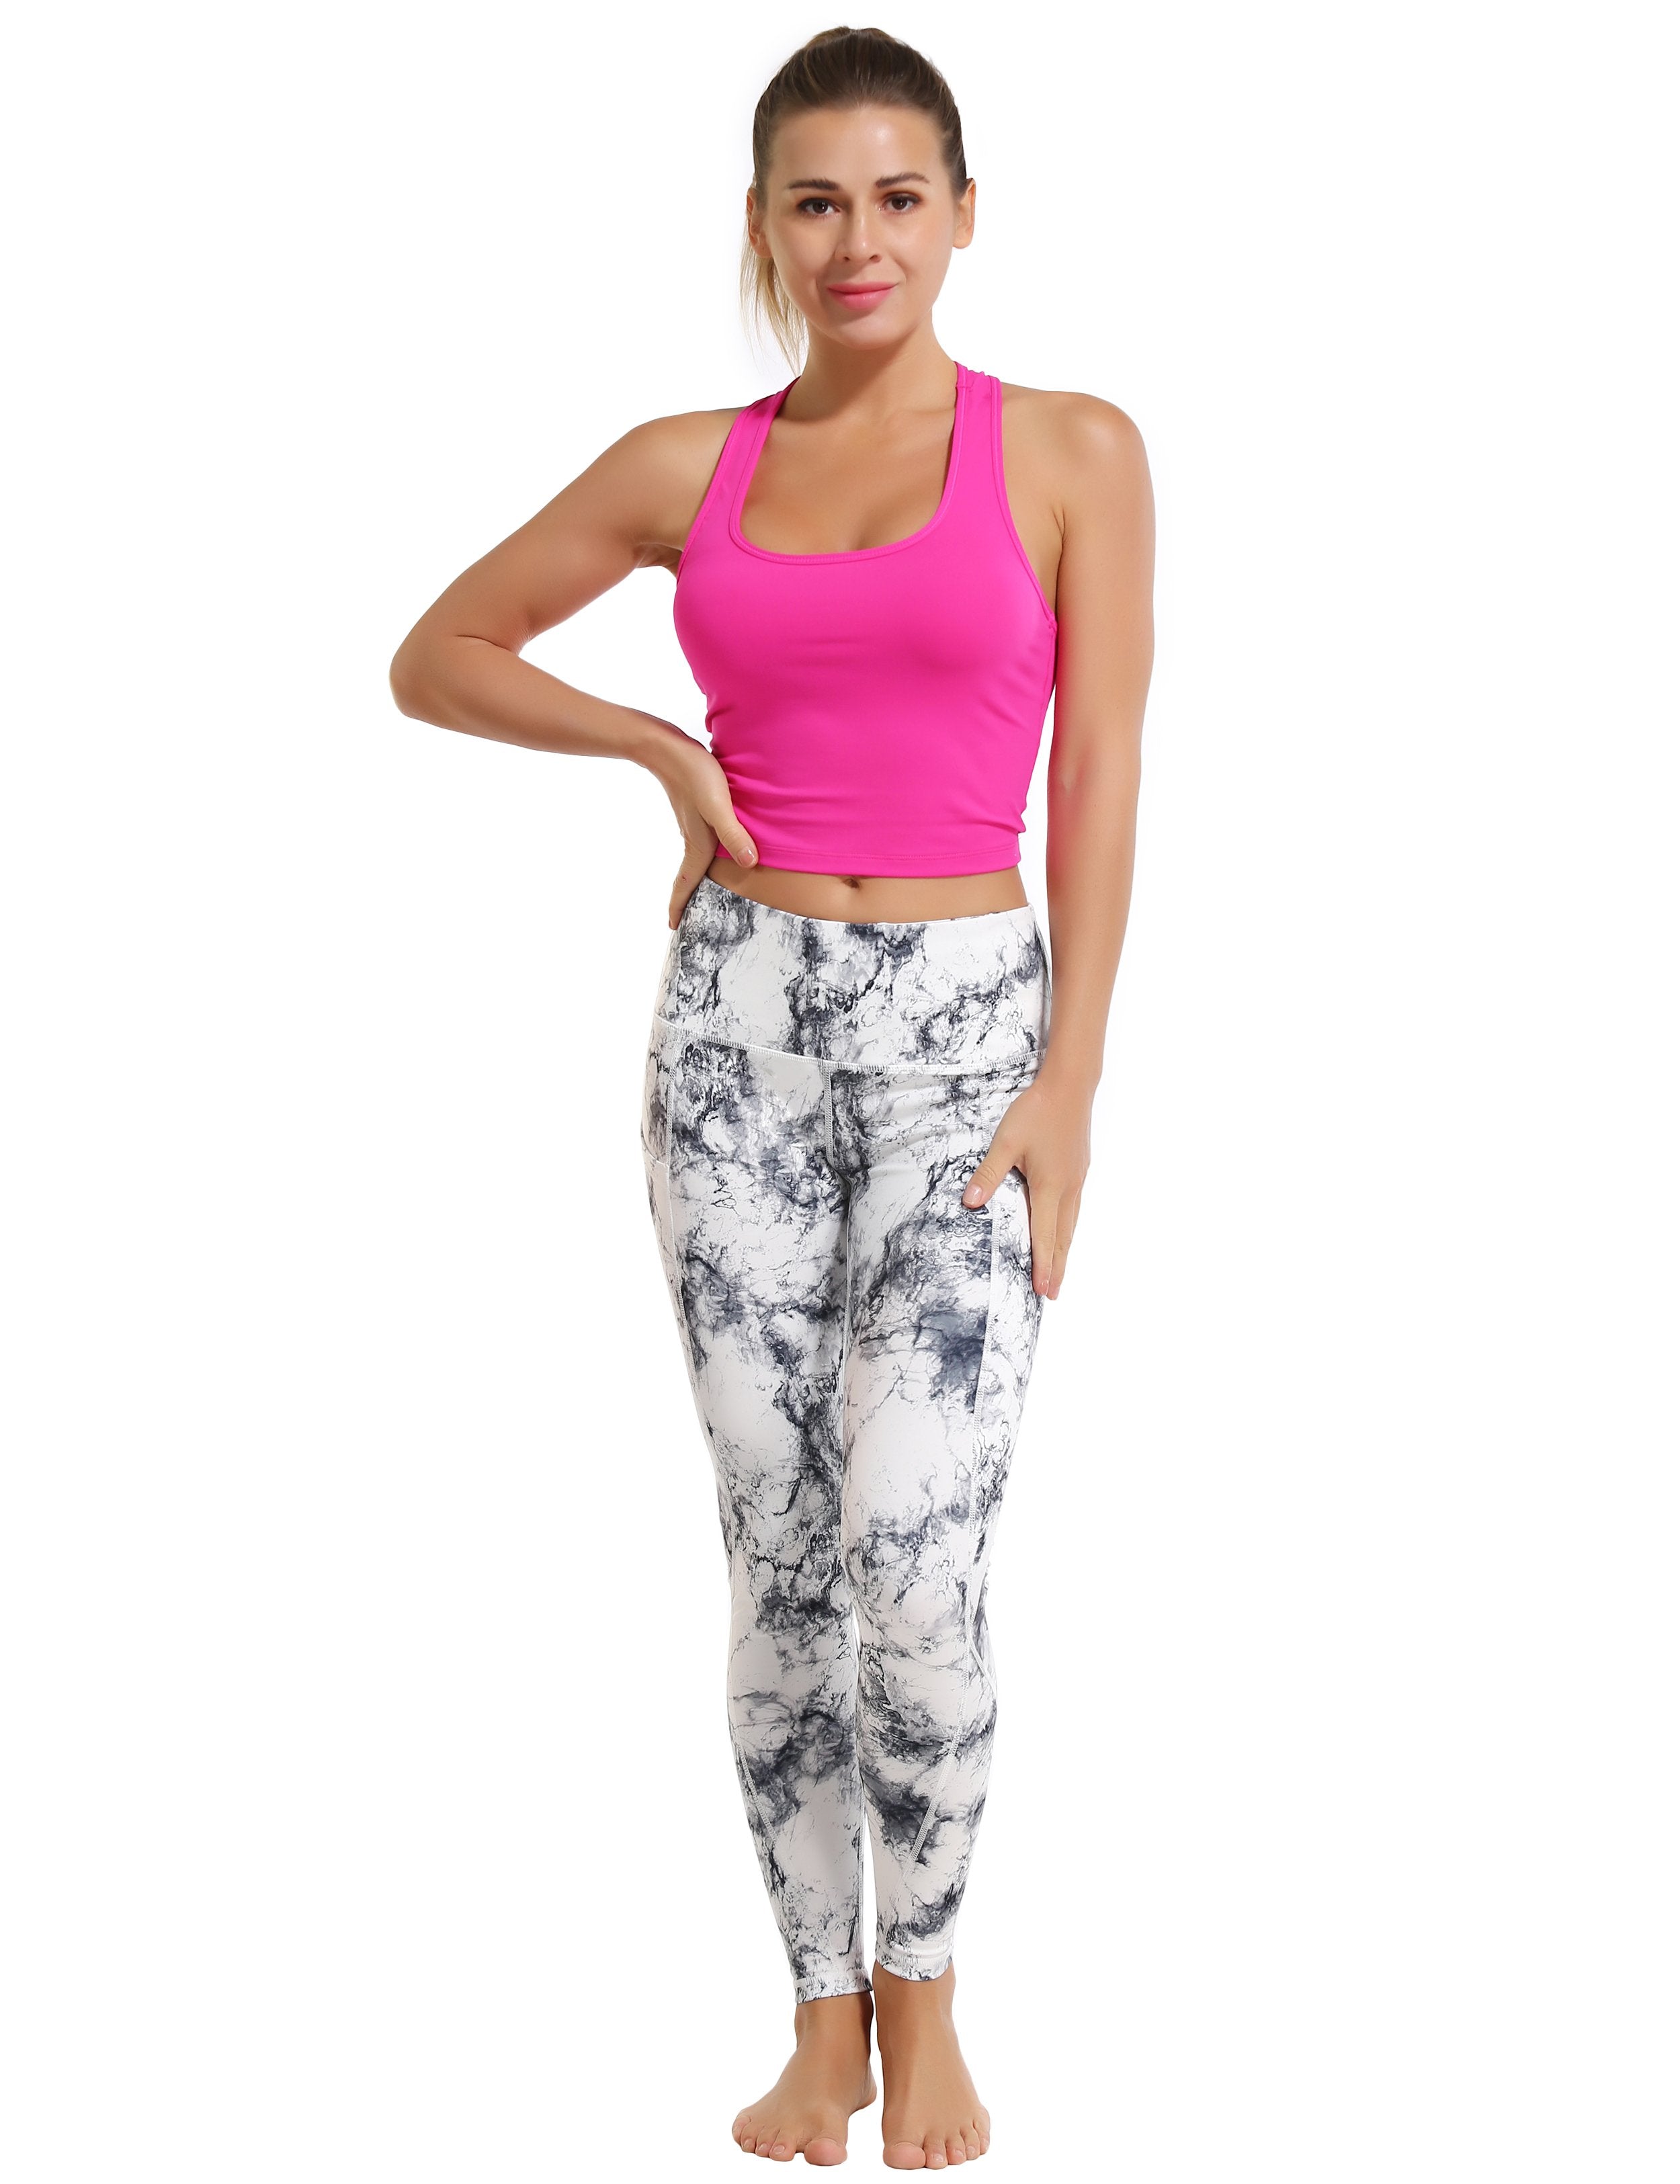 High Waist Side Pockets Yoga Pants arabescato 78%Polyester/22%Spandex Fabric doesn't attract lint easily 4-way stretch No see-through Moisture-wicking Tummy control Inner pocket